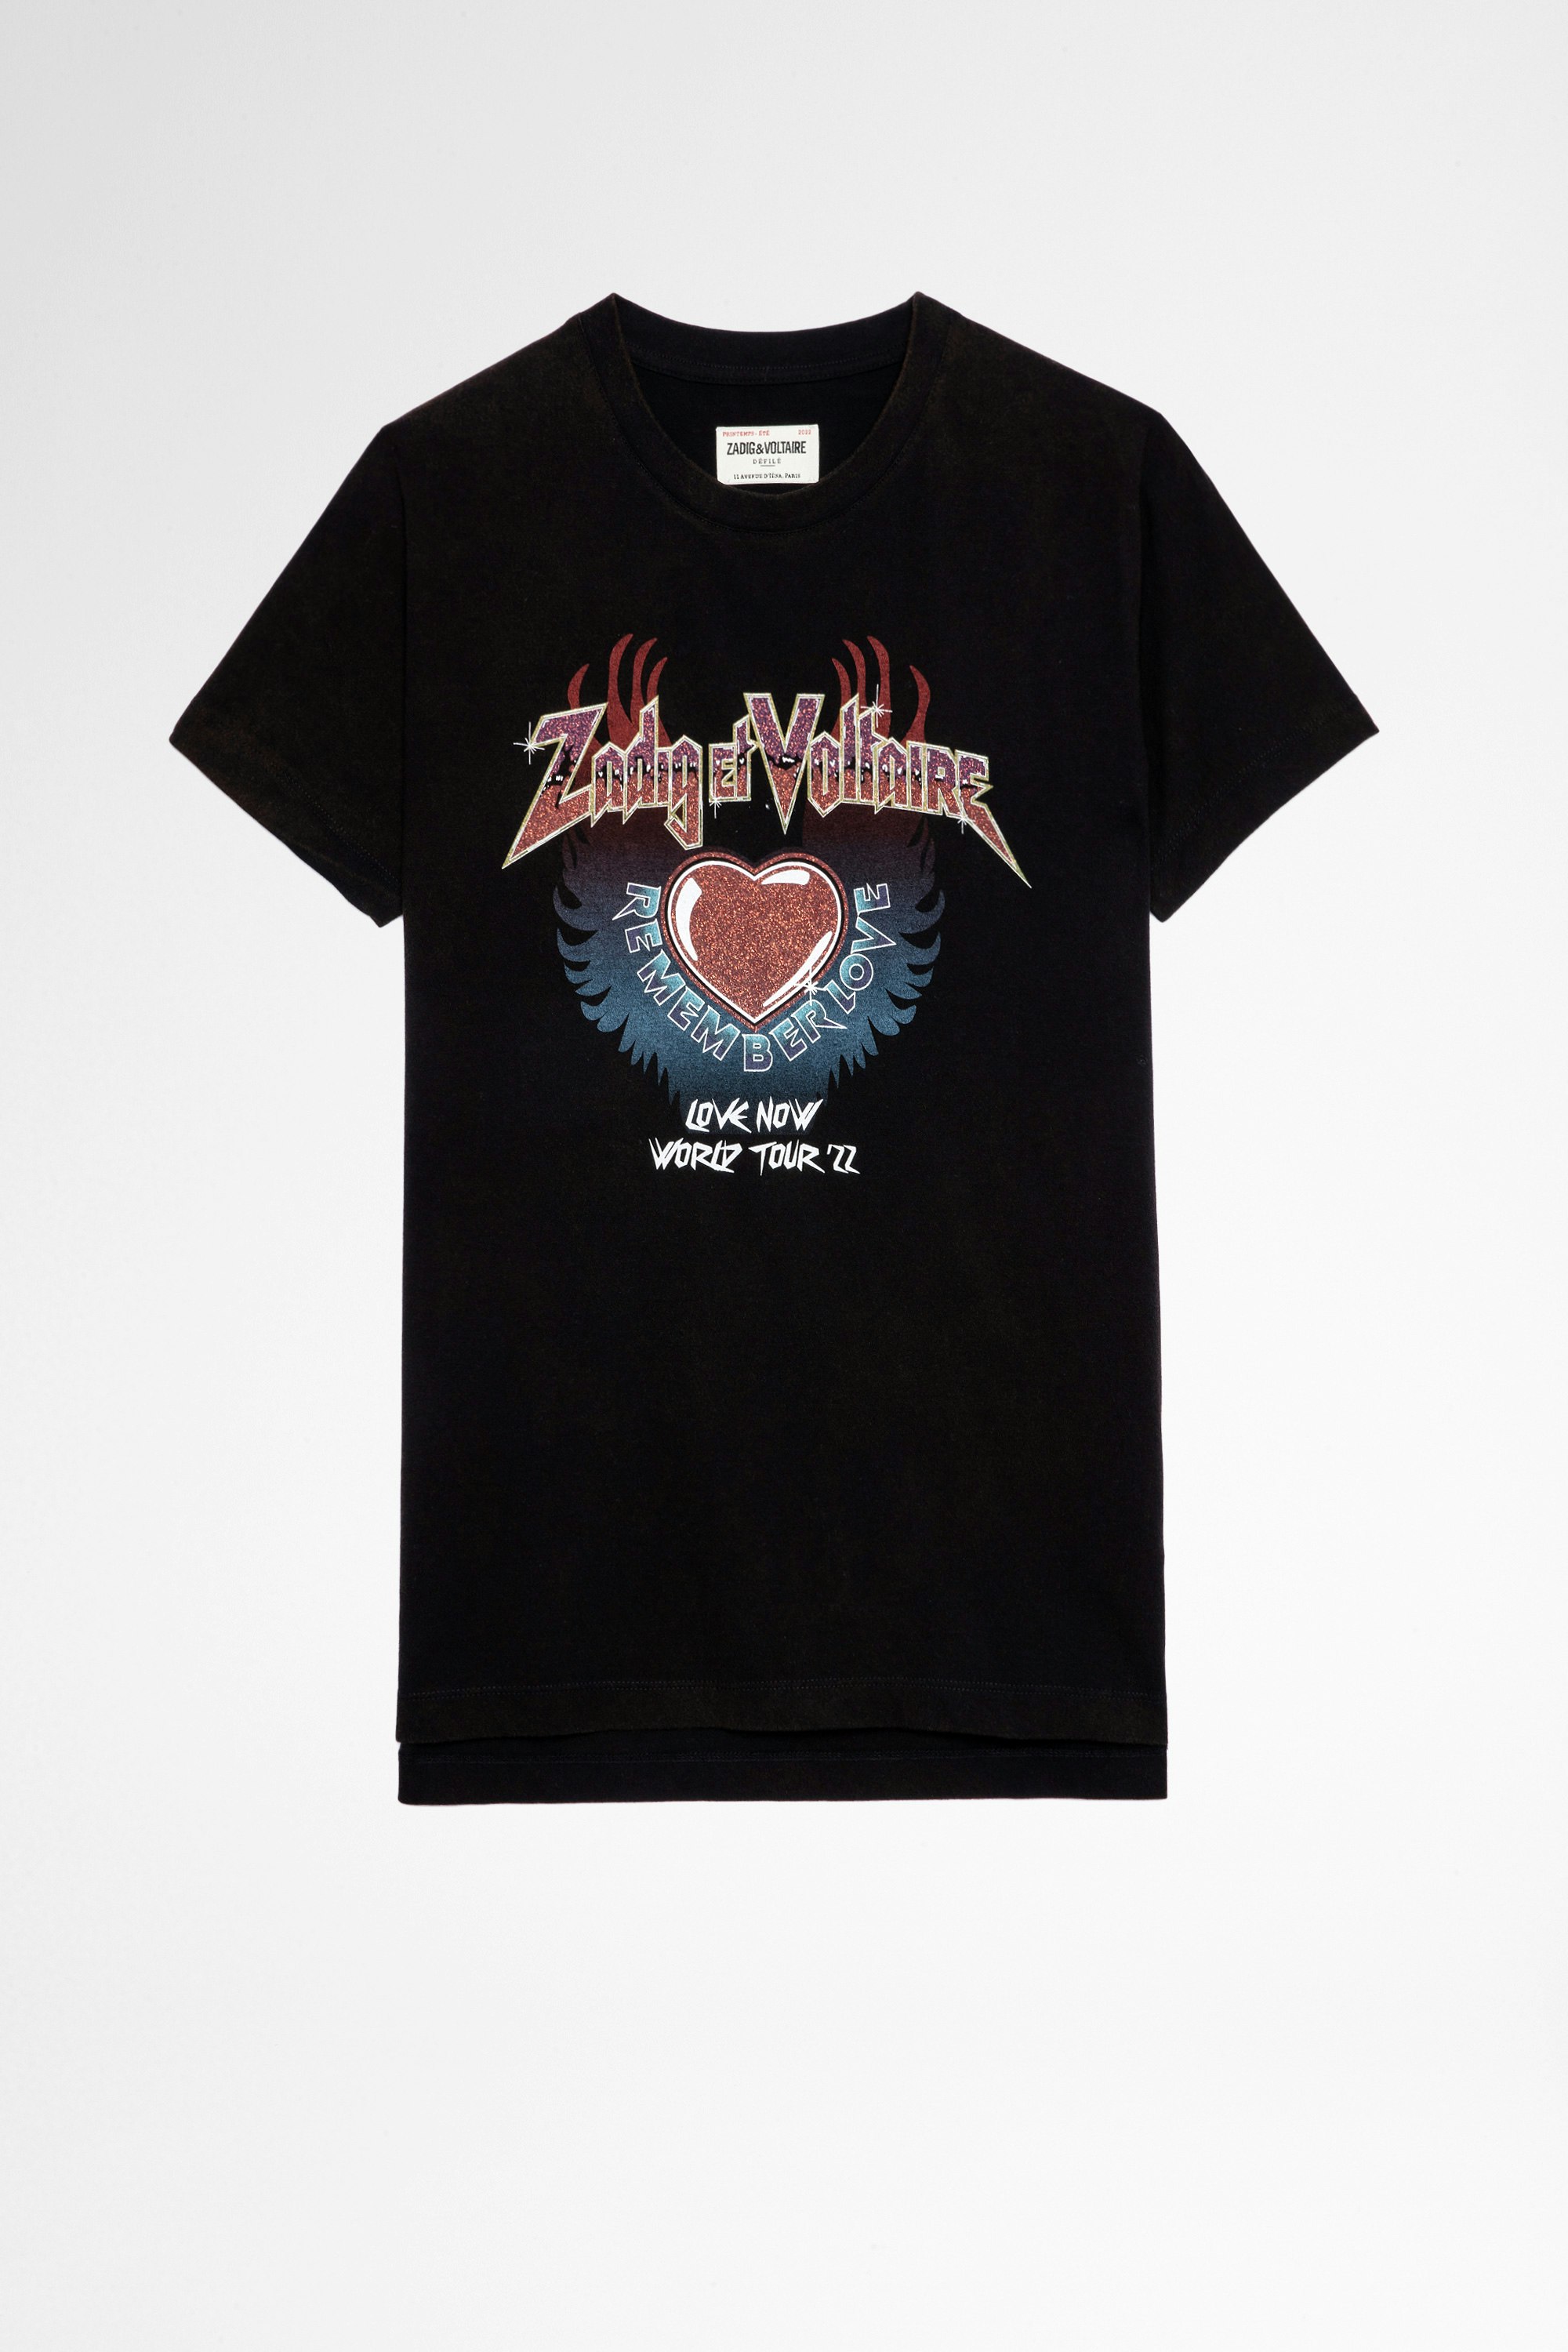 Tom Ｔシャツ Women's black cotton world tour t-shirt. This product is GOTS certified and made with fibers from organic farming.